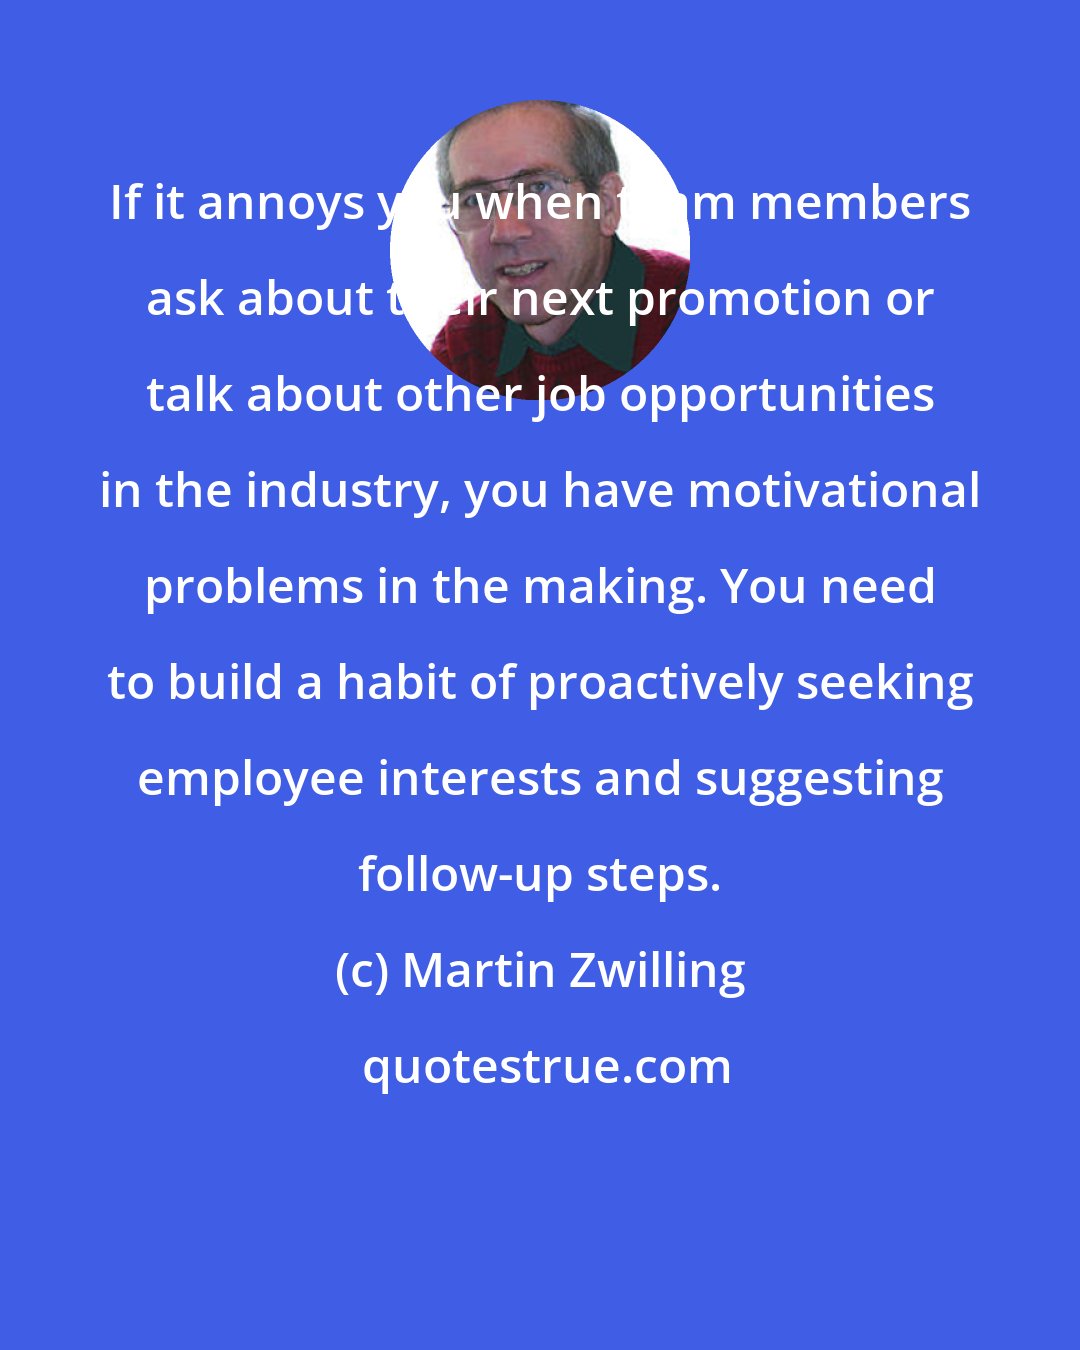 Martin Zwilling: If it annoys you when team members ask about their next promotion or talk about other job opportunities in the industry, you have motivational problems in the making. You need to build a habit of proactively seeking employee interests and suggesting follow-up steps.